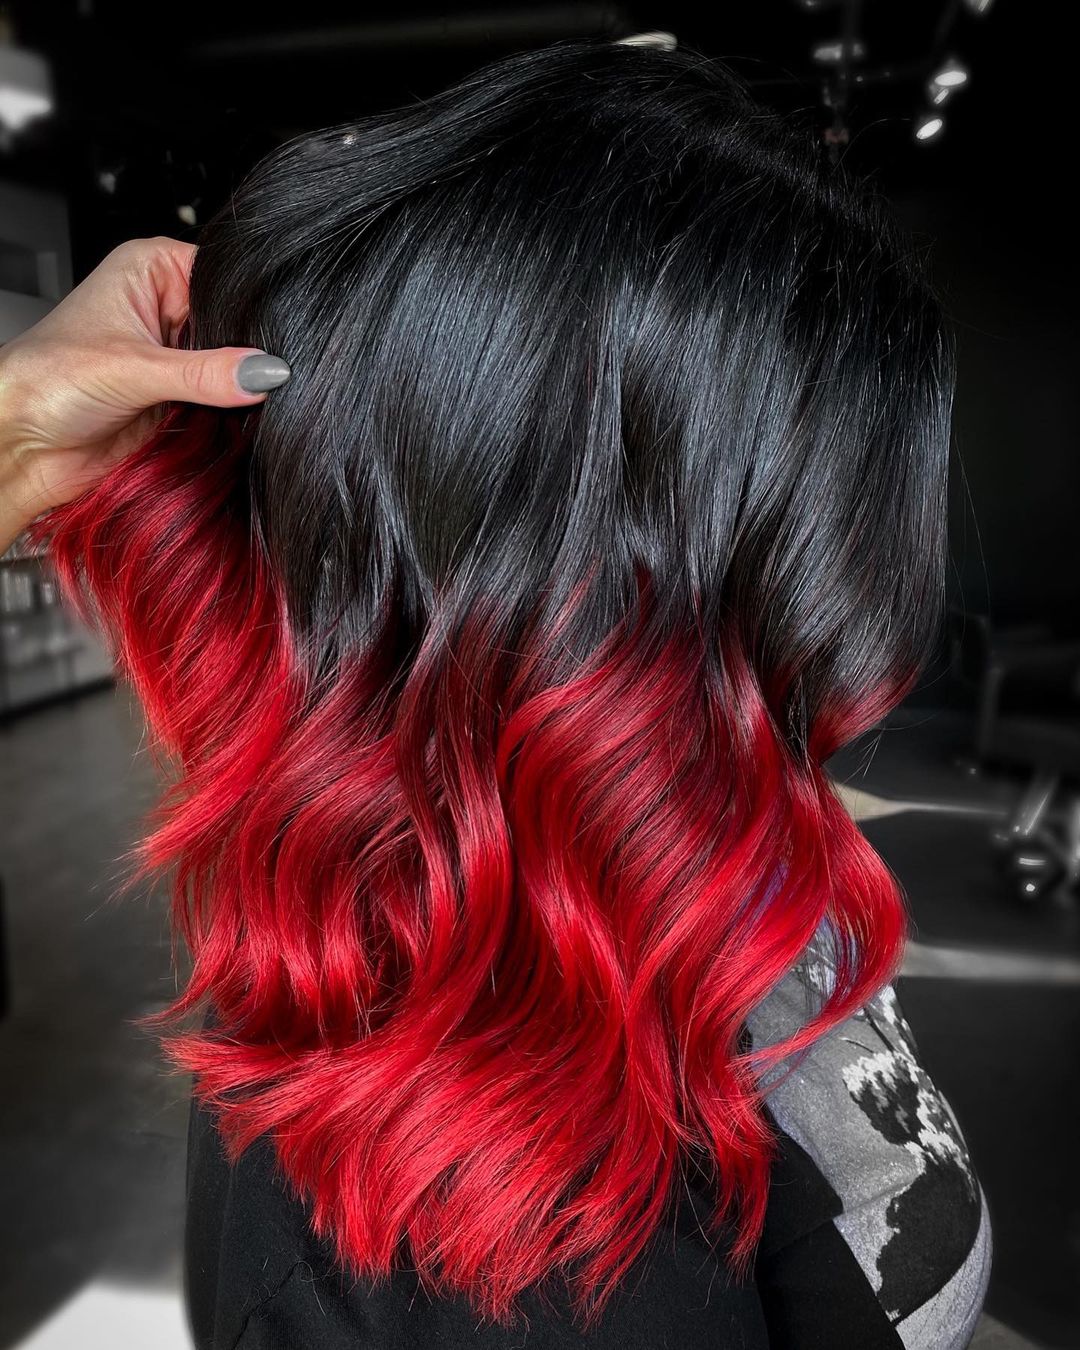 Black Hair With Bright Red Tips